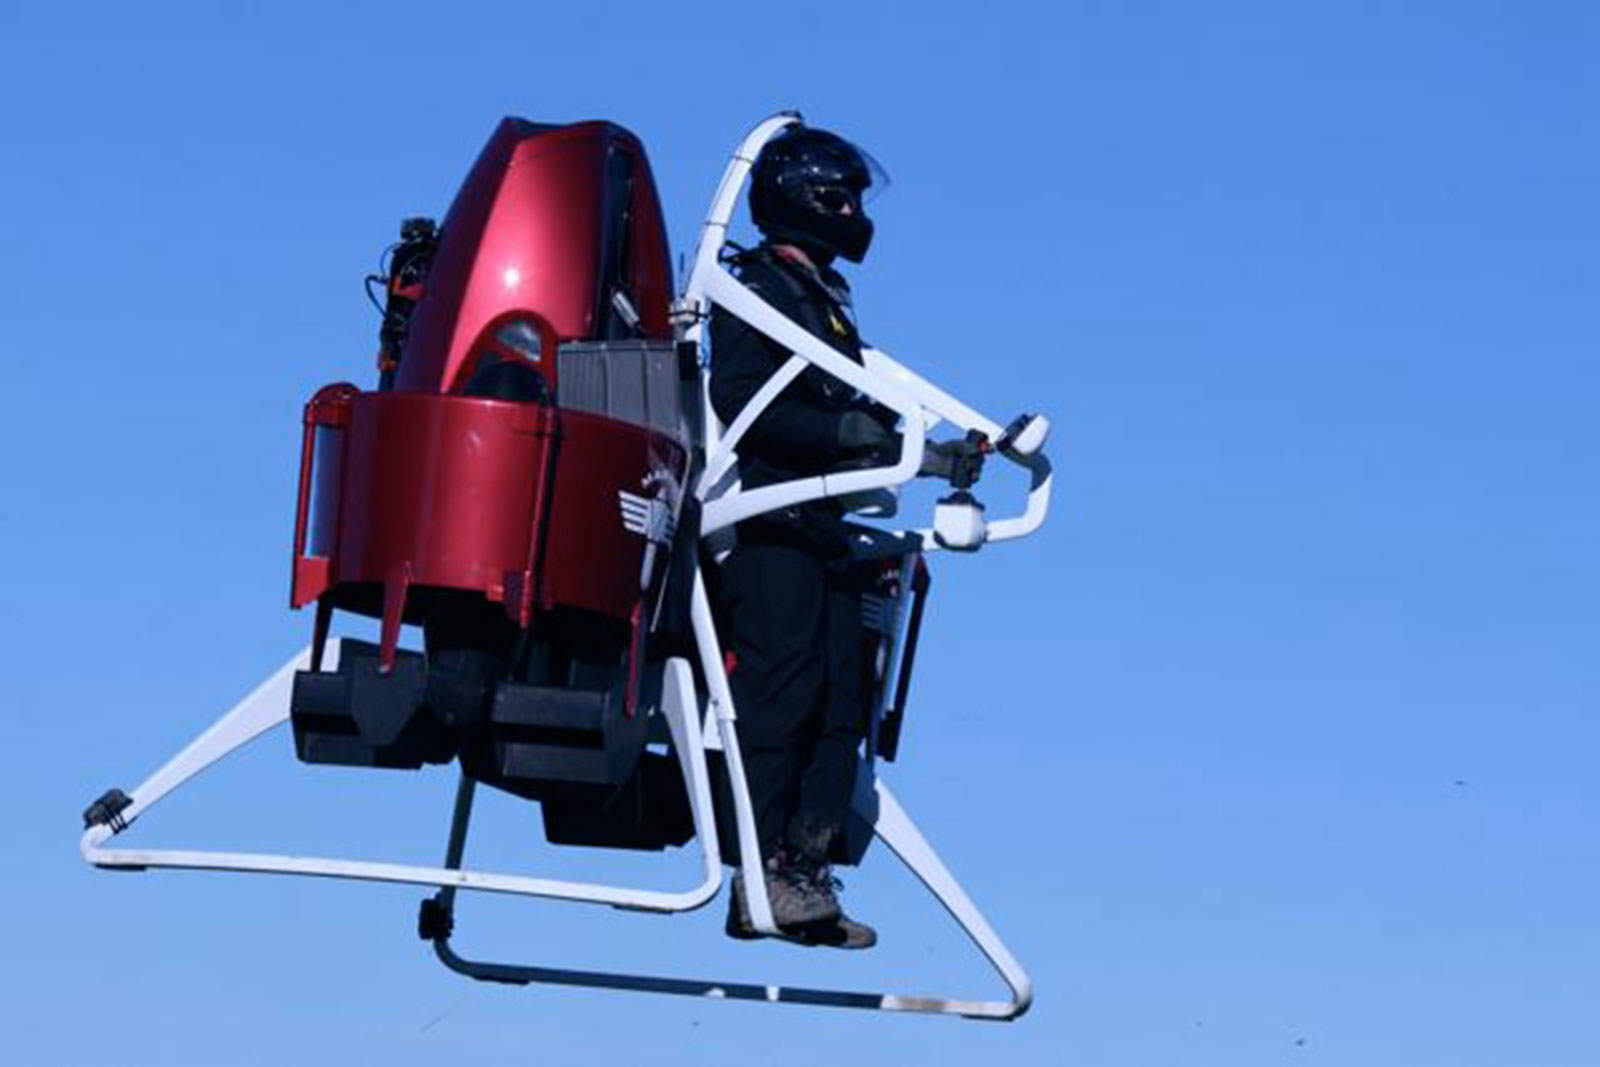 The Martin Jetpack can stay in the air for 30 minutes.